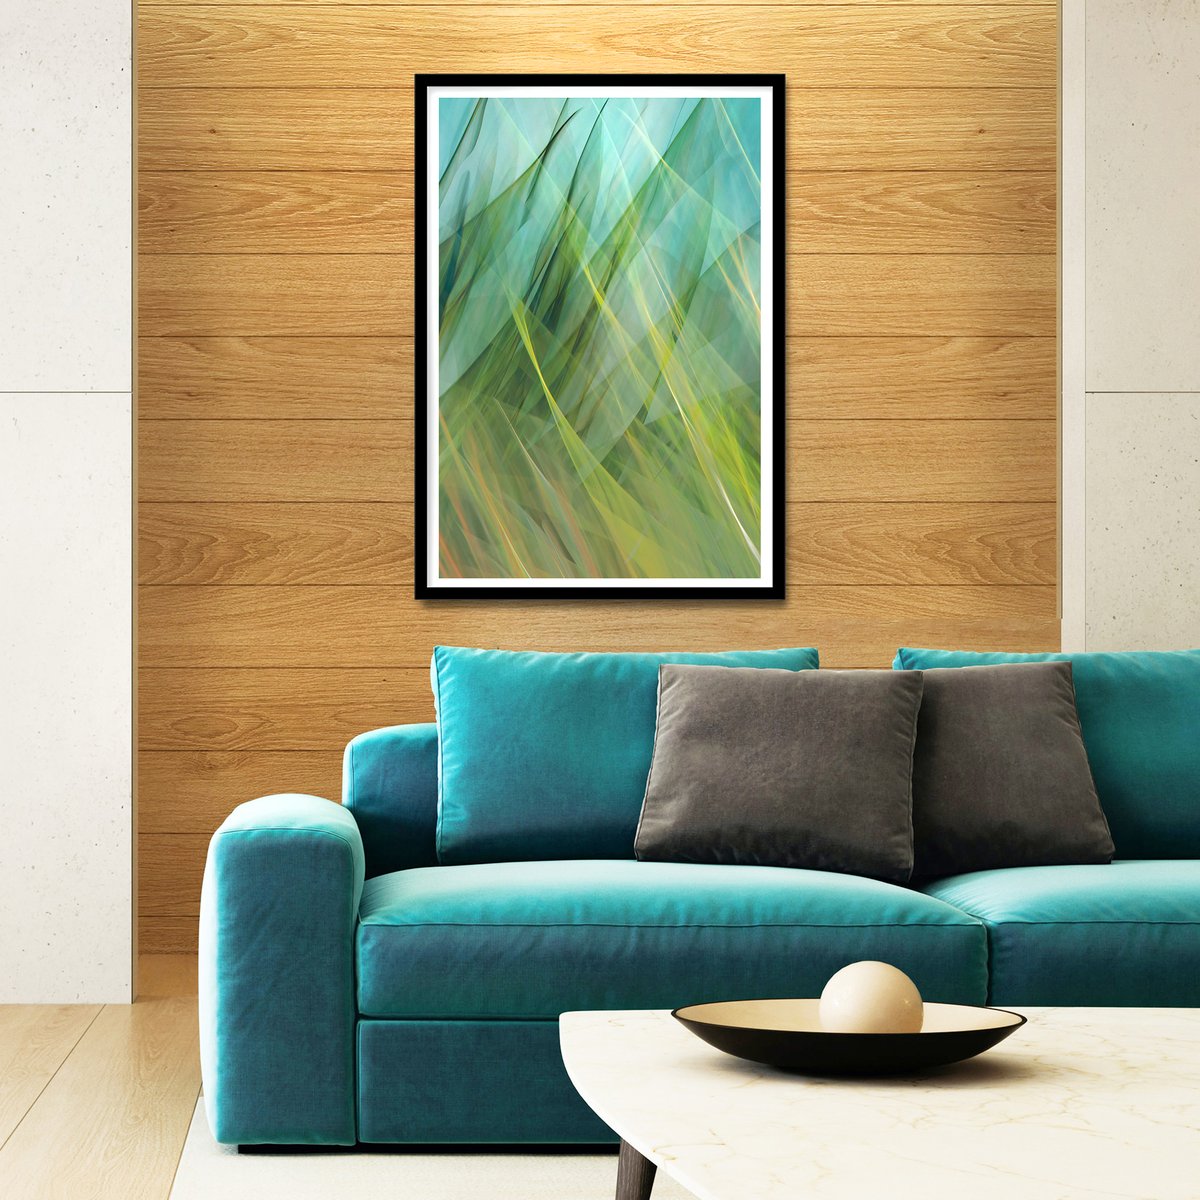 Why Is Hotel Art So Boring? I Have The Solution!
My mission is to eradicate boring hotel art with modern superior artwork I create. Learn More..
#hoteldesign #artforhotels #hospitalityart 

angelacameron.com/blogs/art/why-…